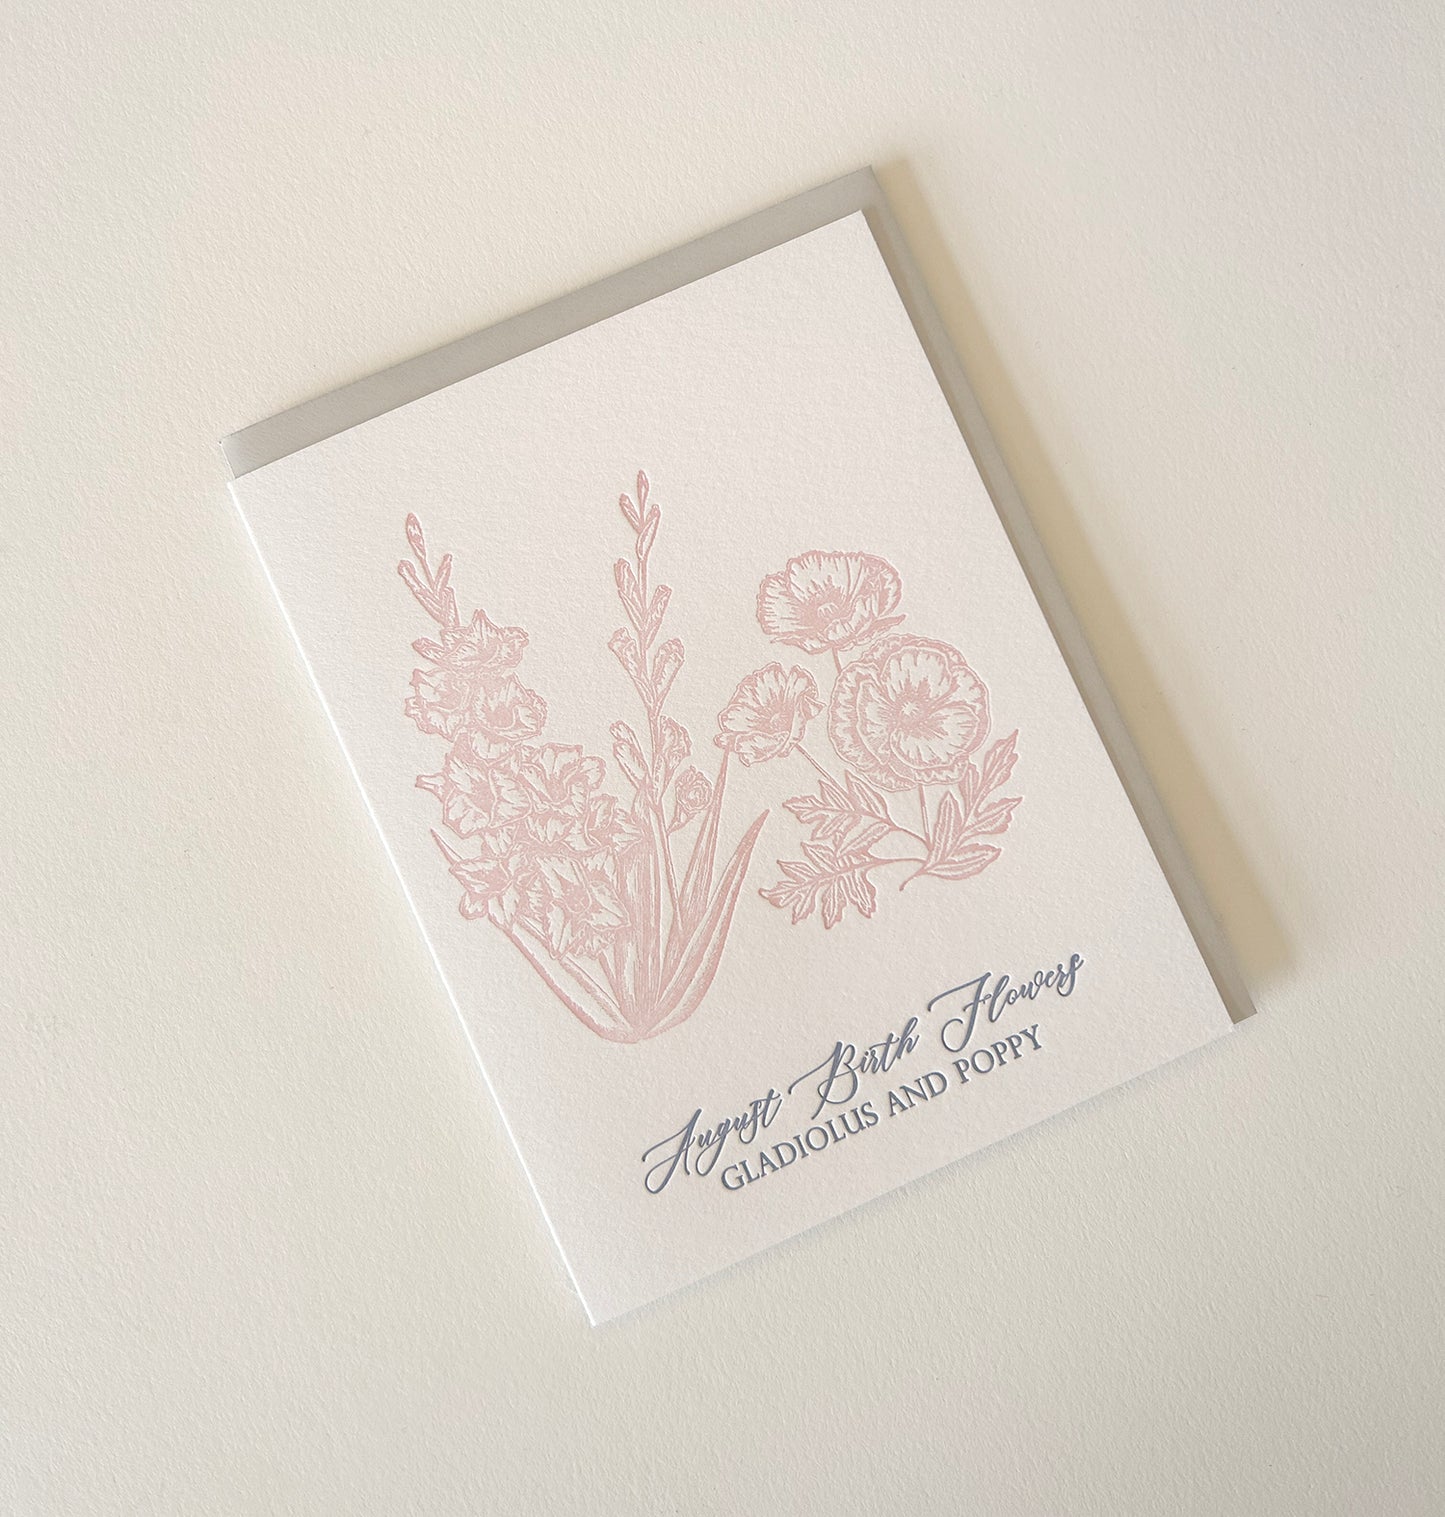 Letterpress birthday card with florals that says "August Birth Flowers, Gladiolus and Poppy" by Rust Belt Love